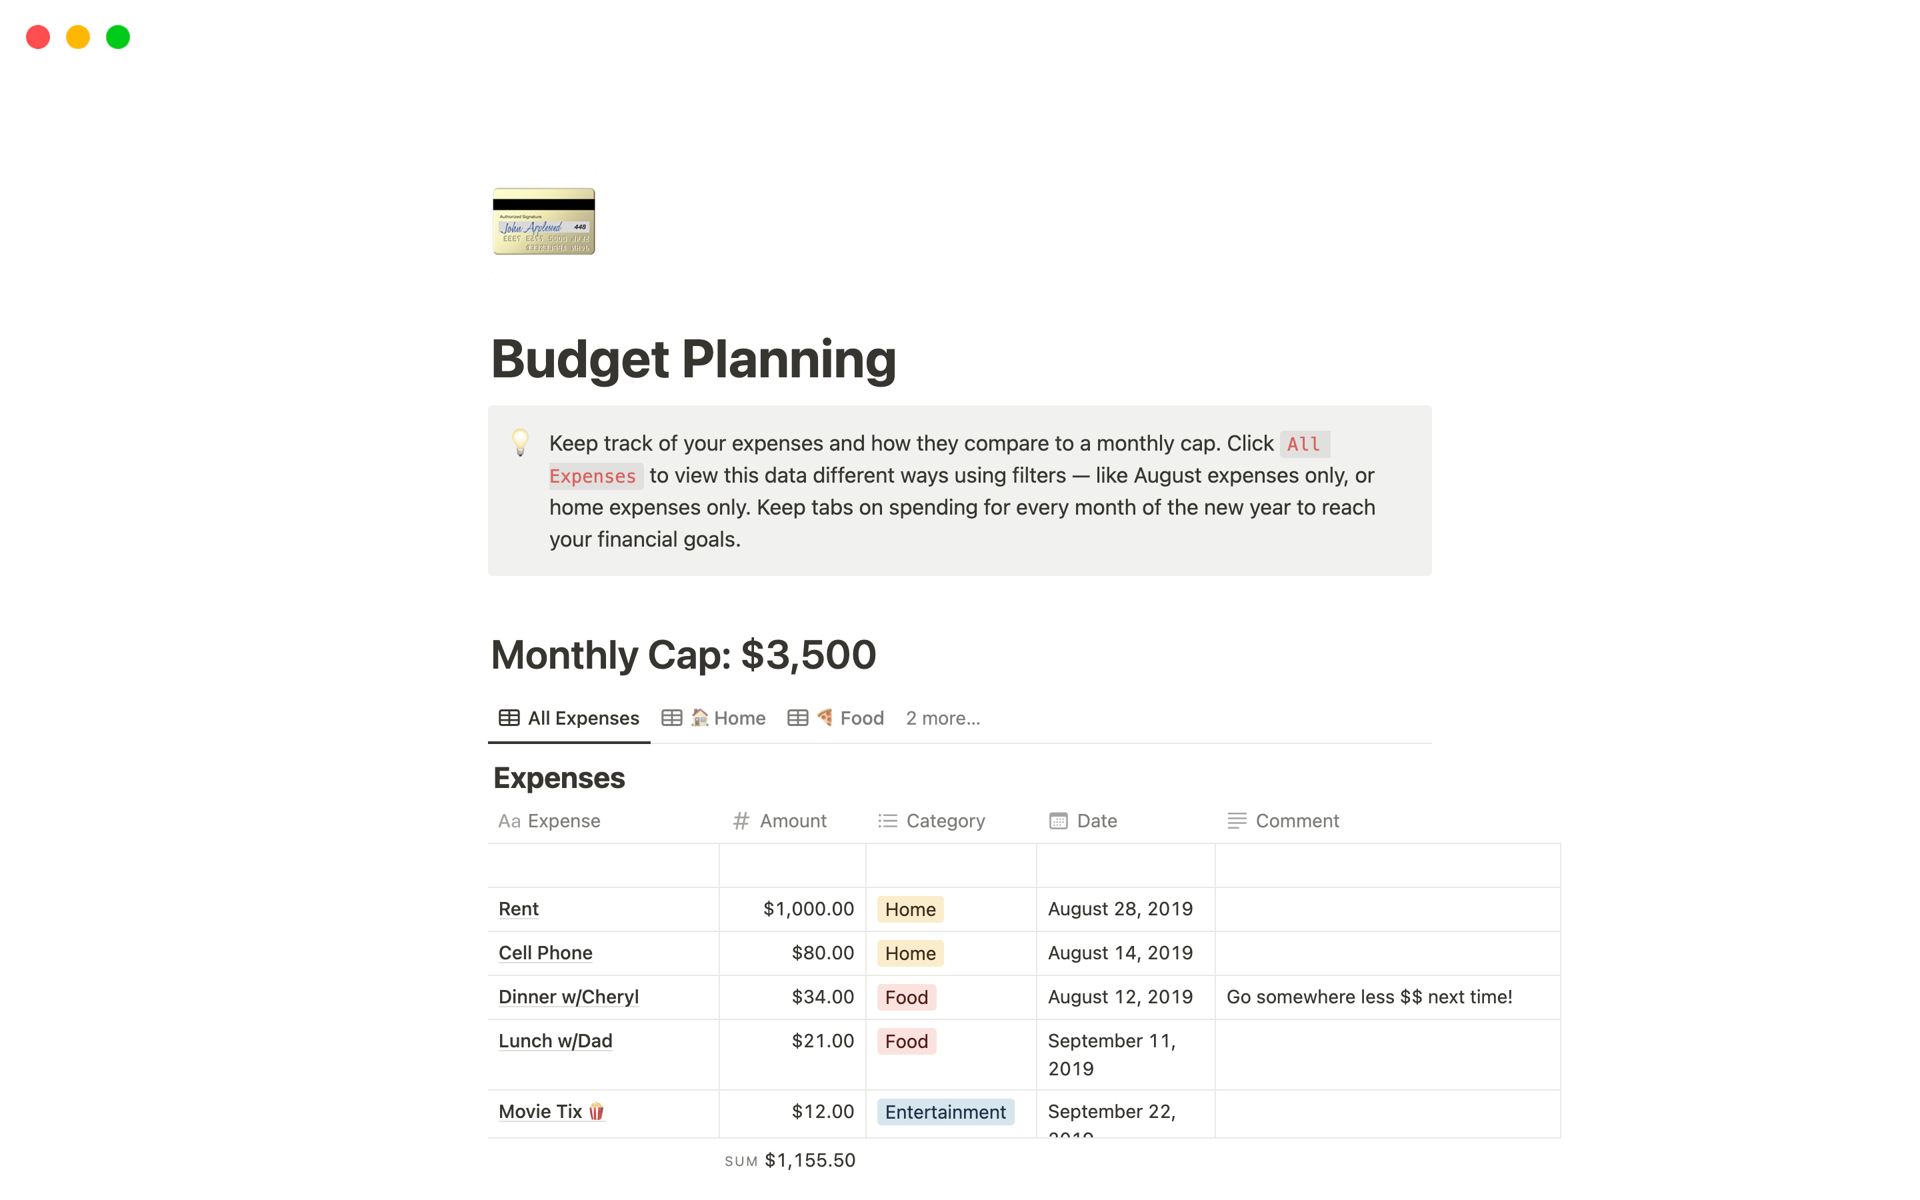 This is a useful budget planning system!